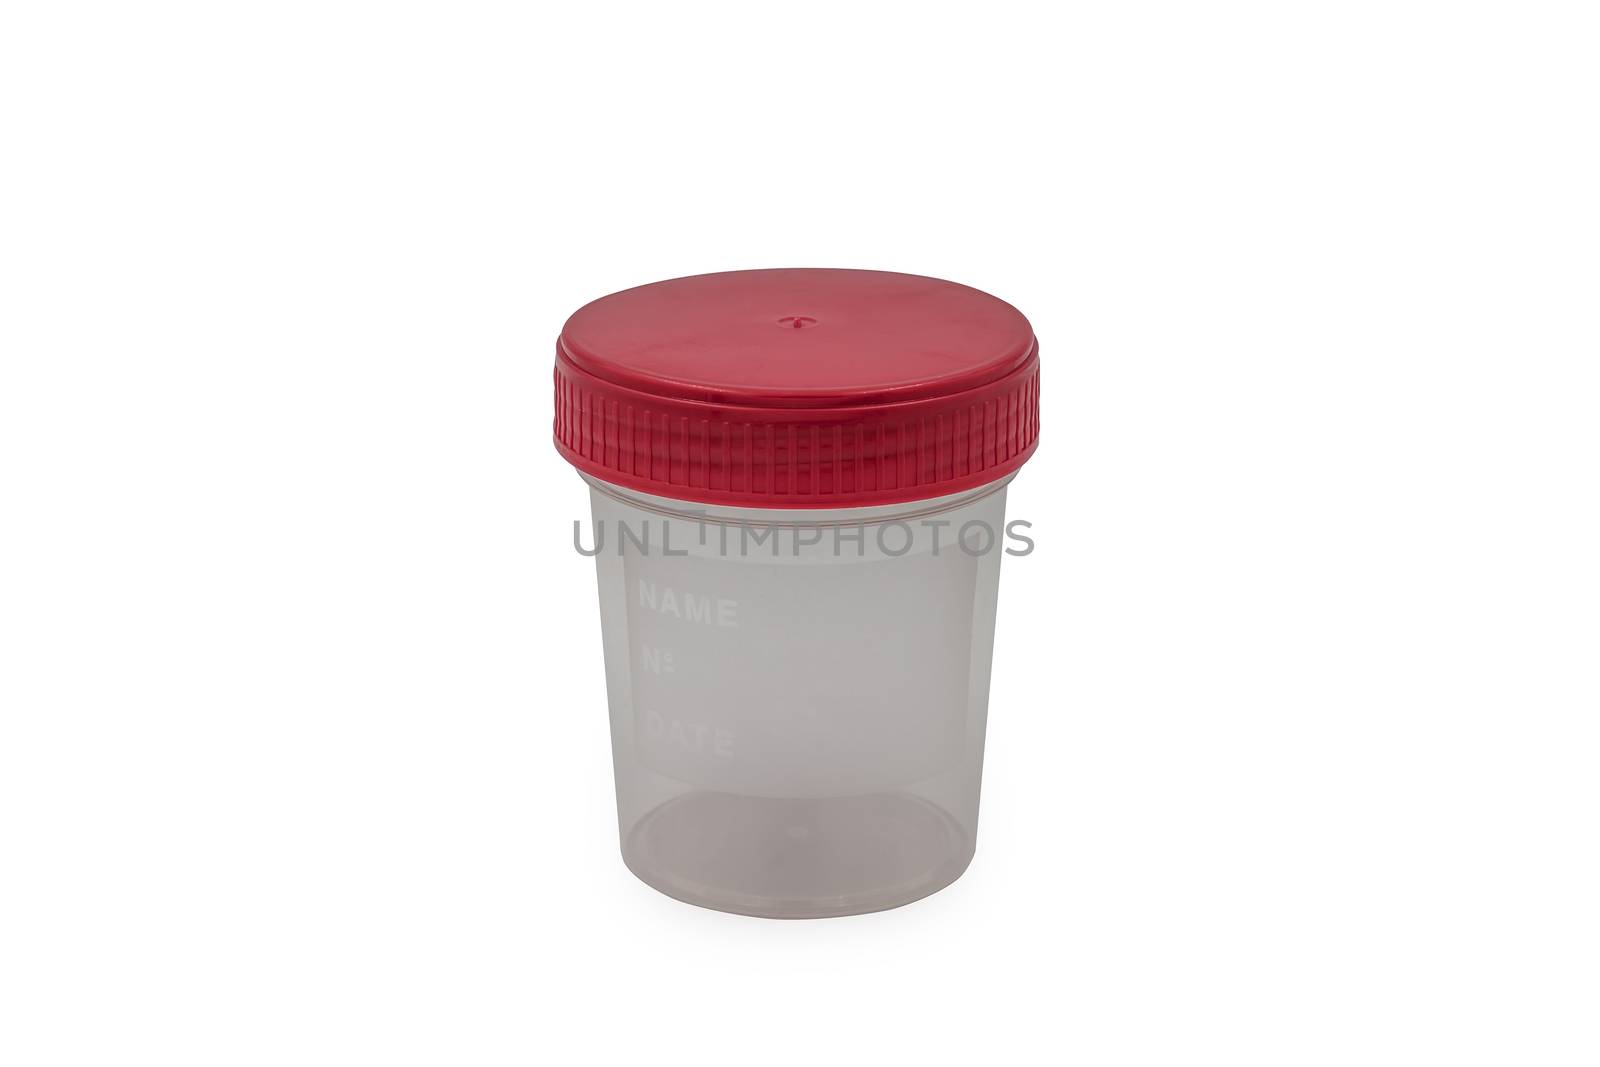 Urine container isolated by sewer12